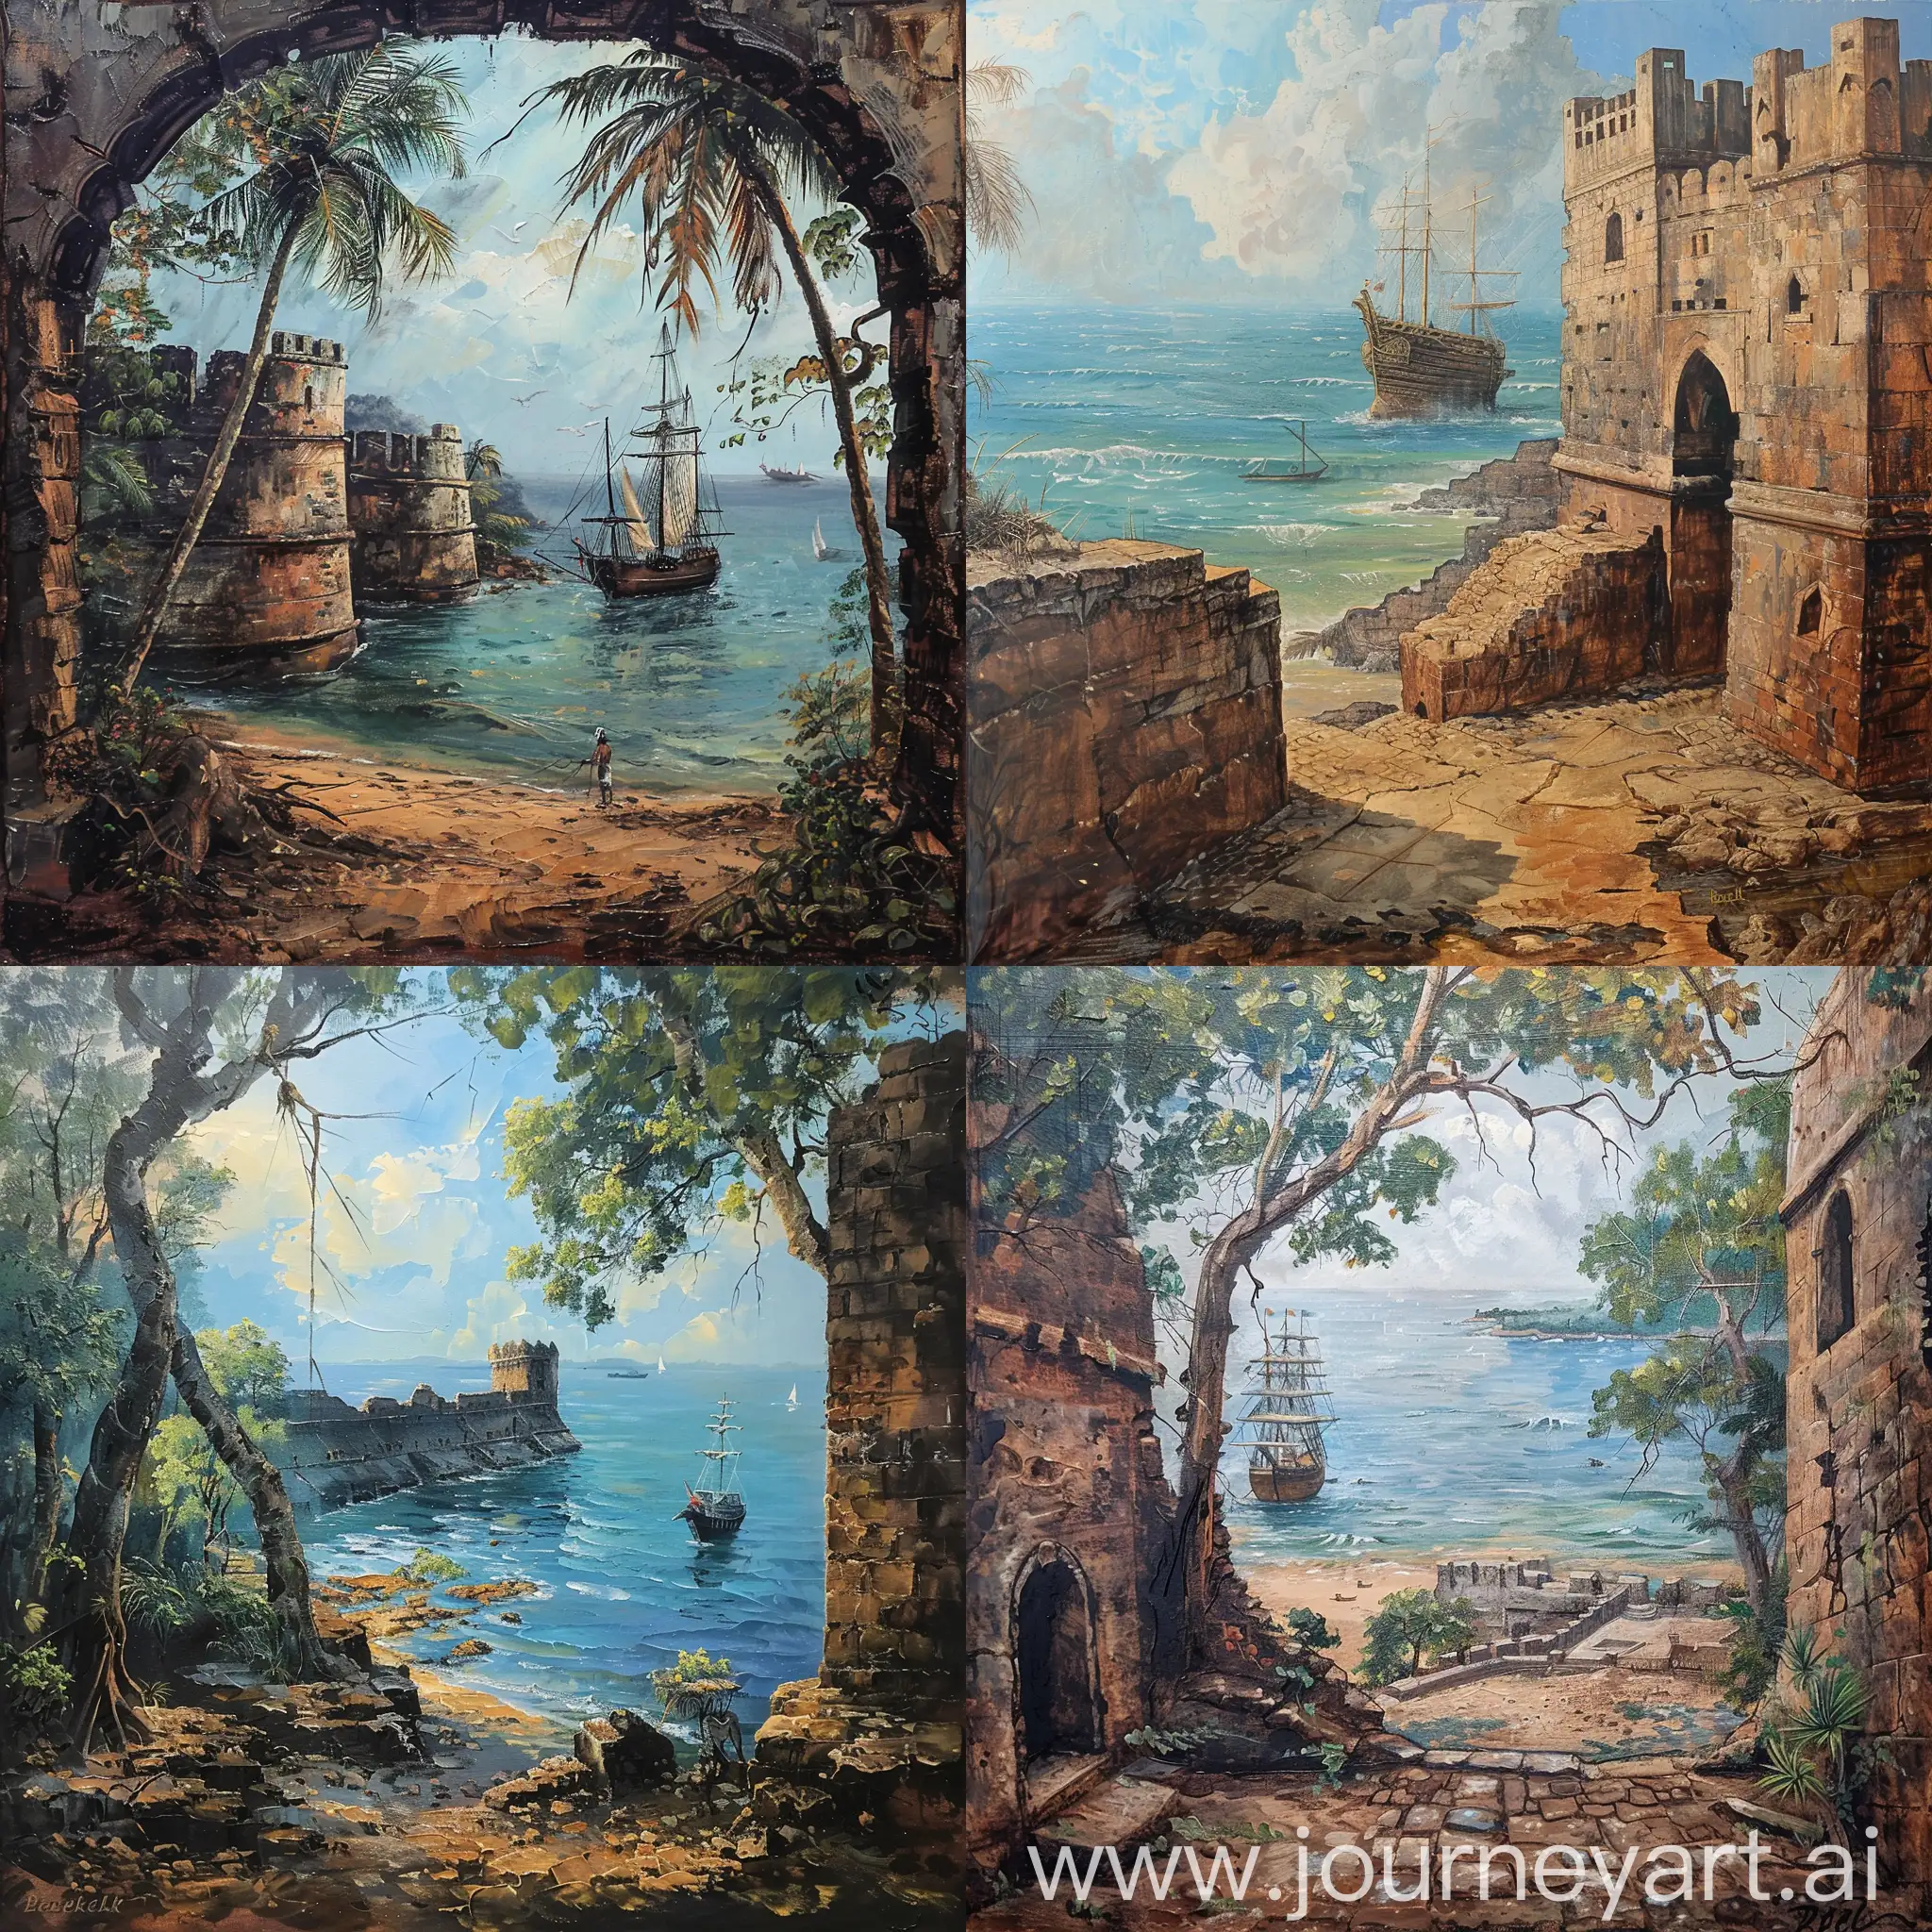 Vintage-Watercolor-Painting-of-Bekal-Fort-and-Ancient-Ship-on-the-Seashore